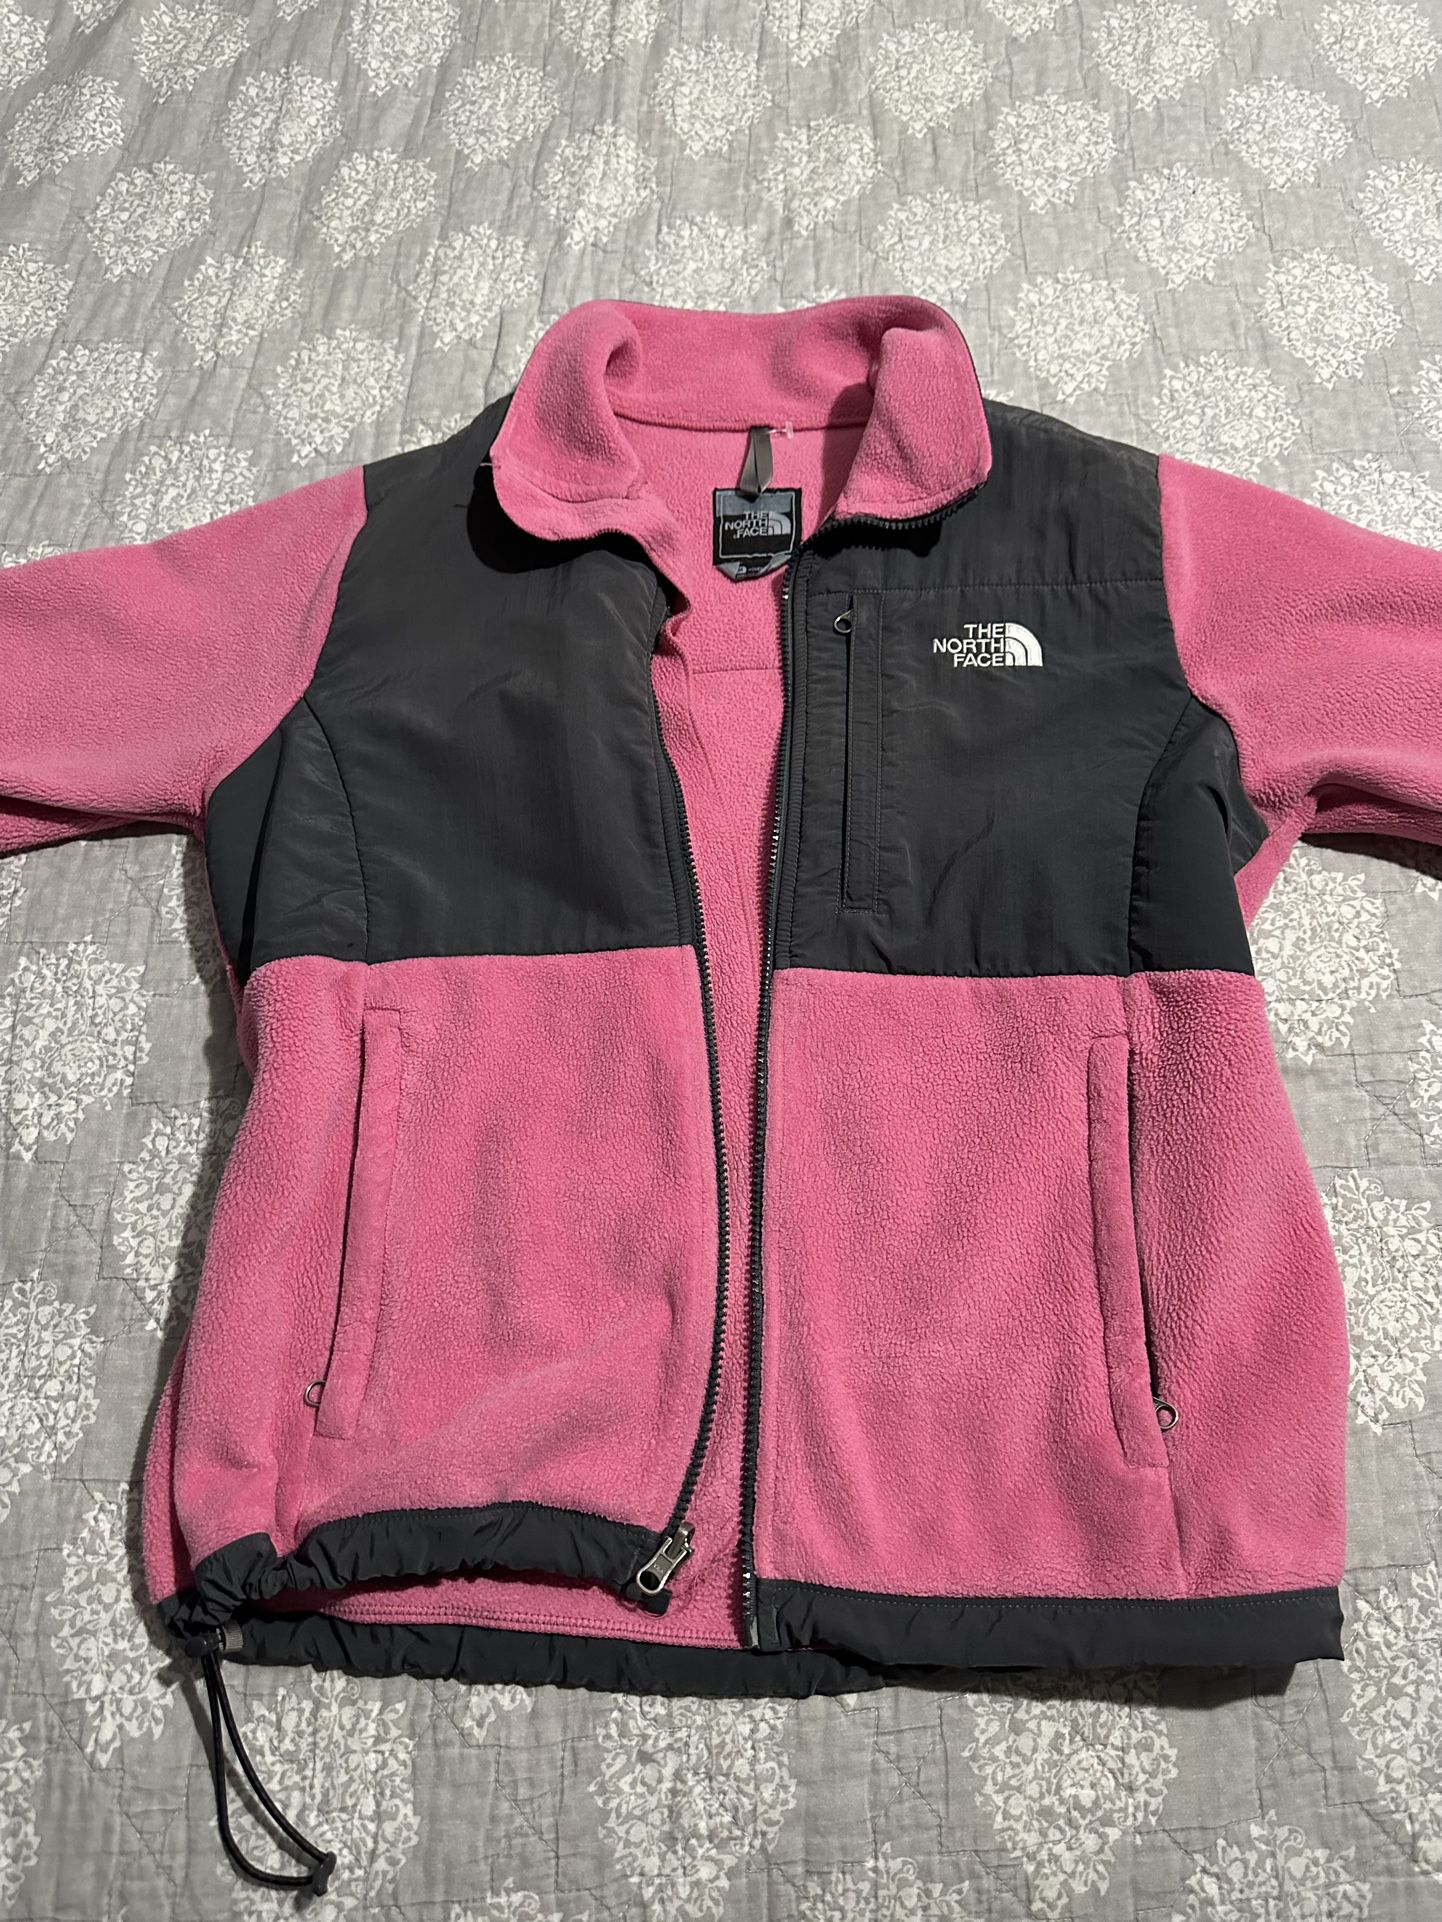 women’s north face jacket 